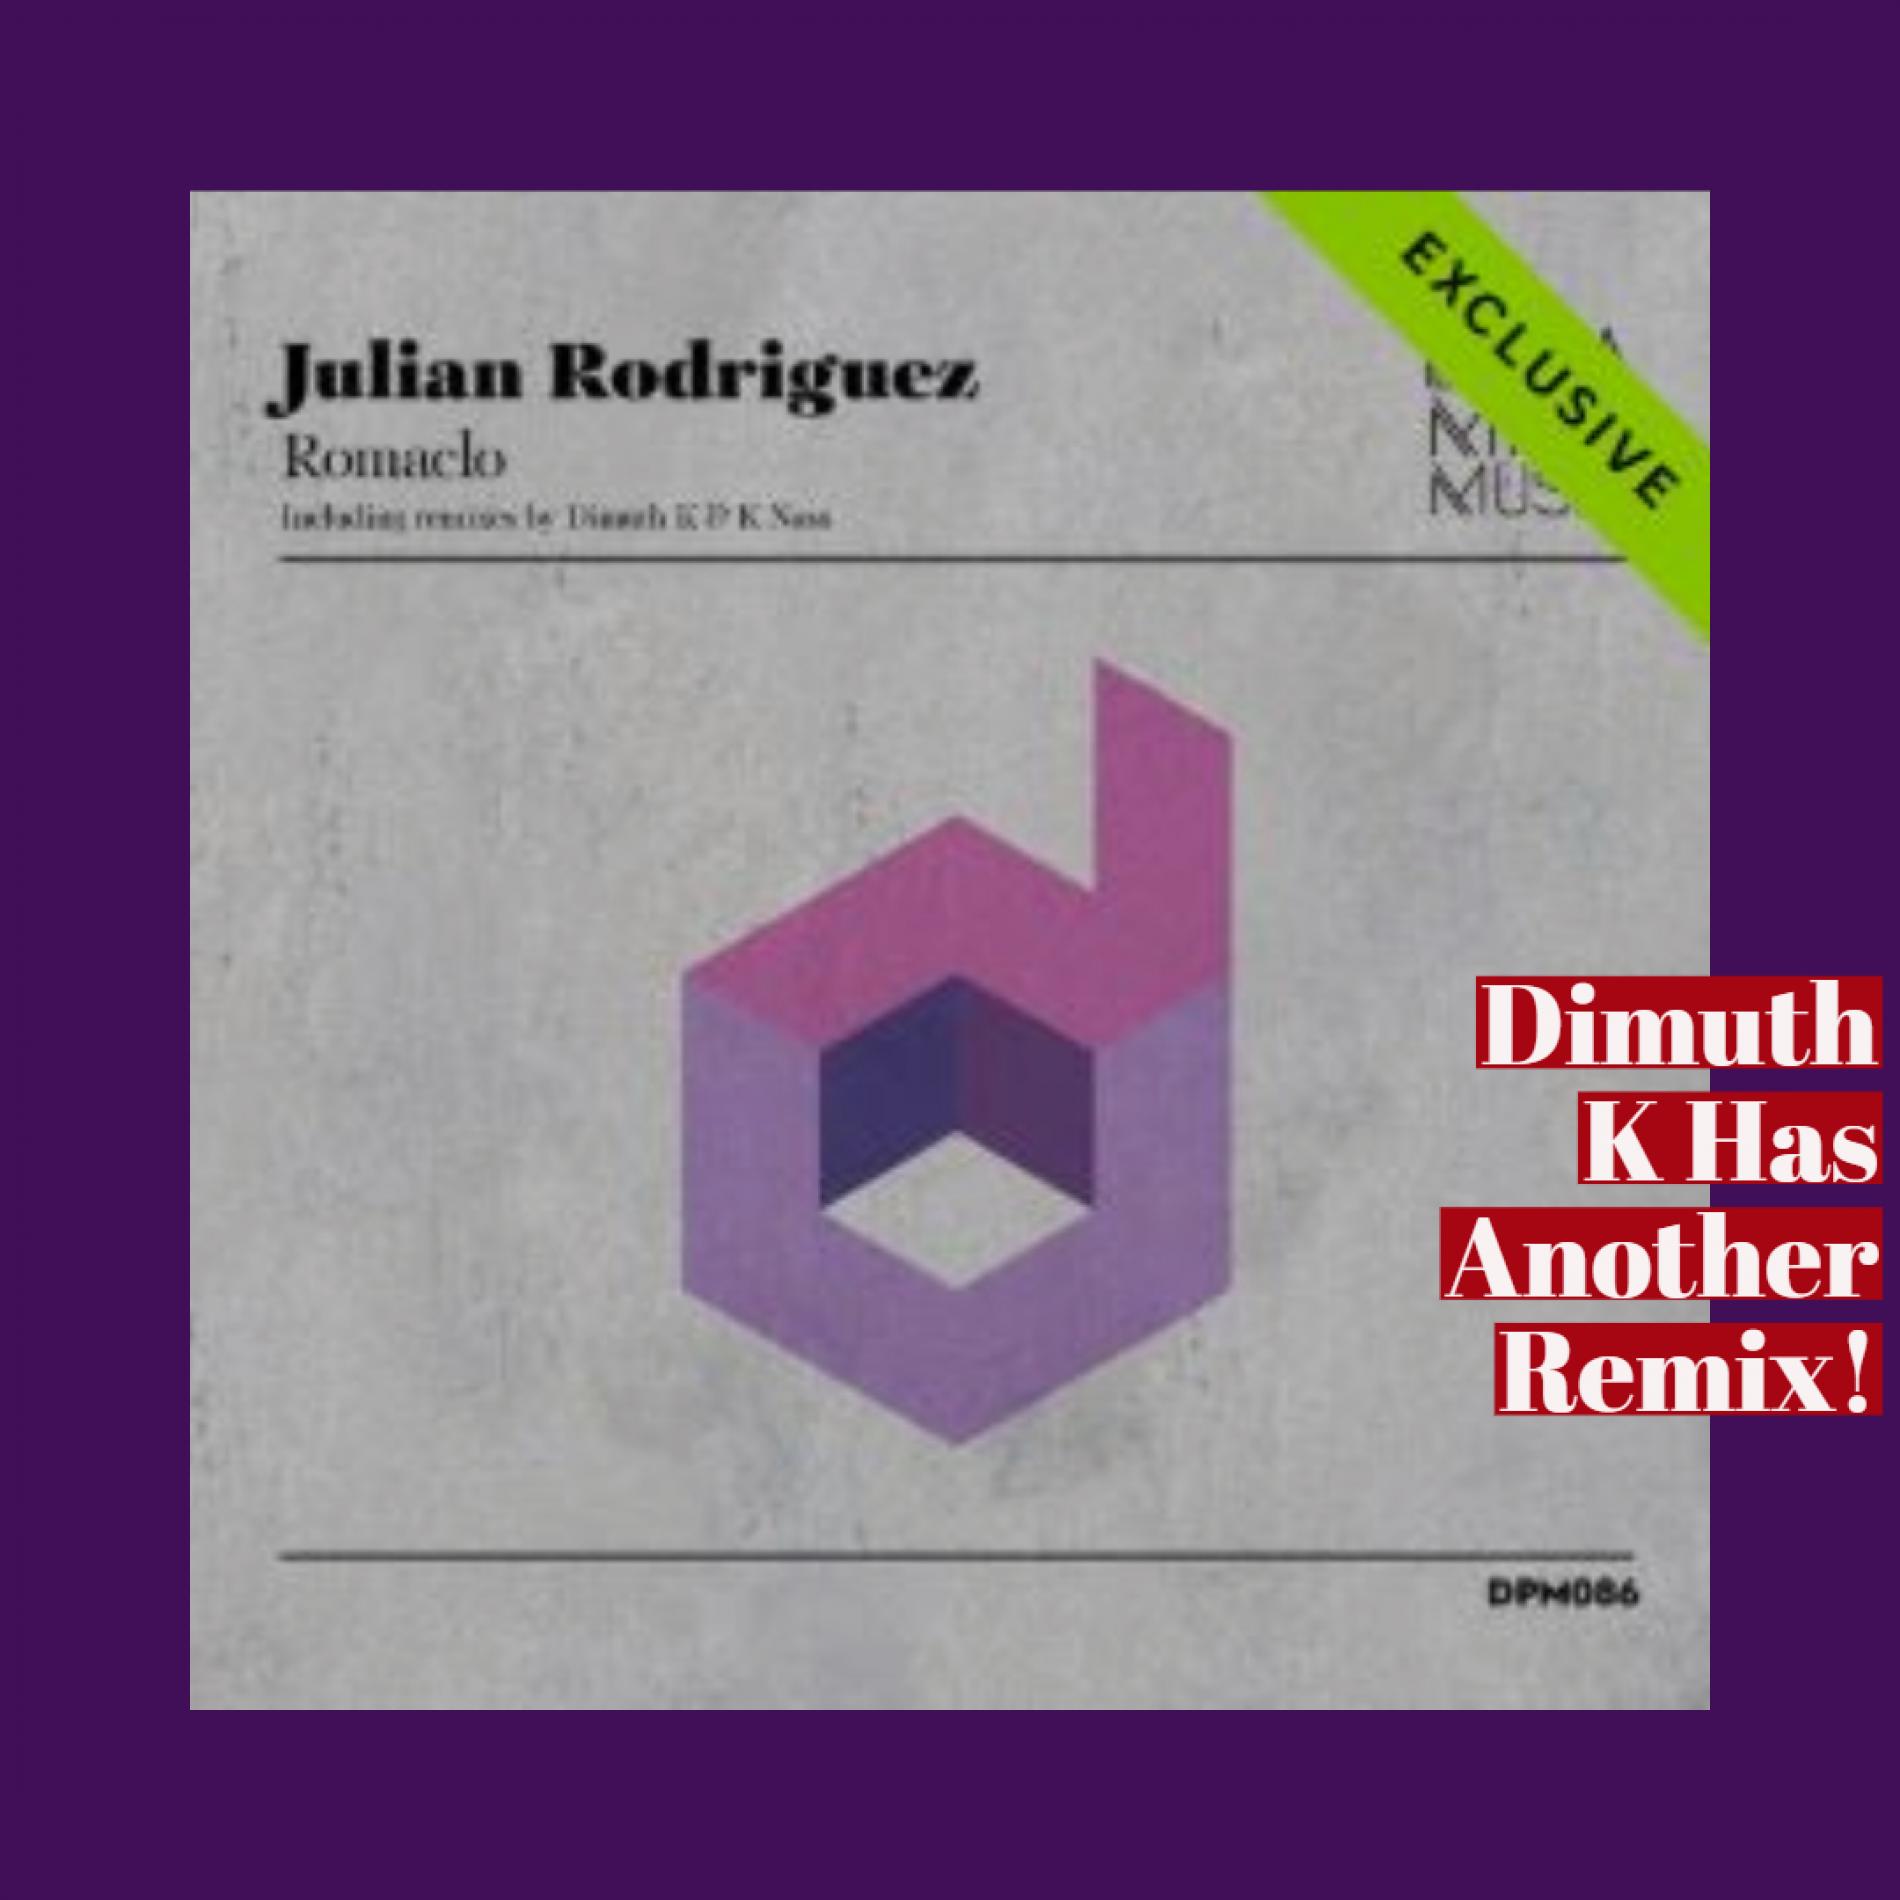 Romaclo By Julian Rodriguez Get’s The Dimuth K Remix Treatment